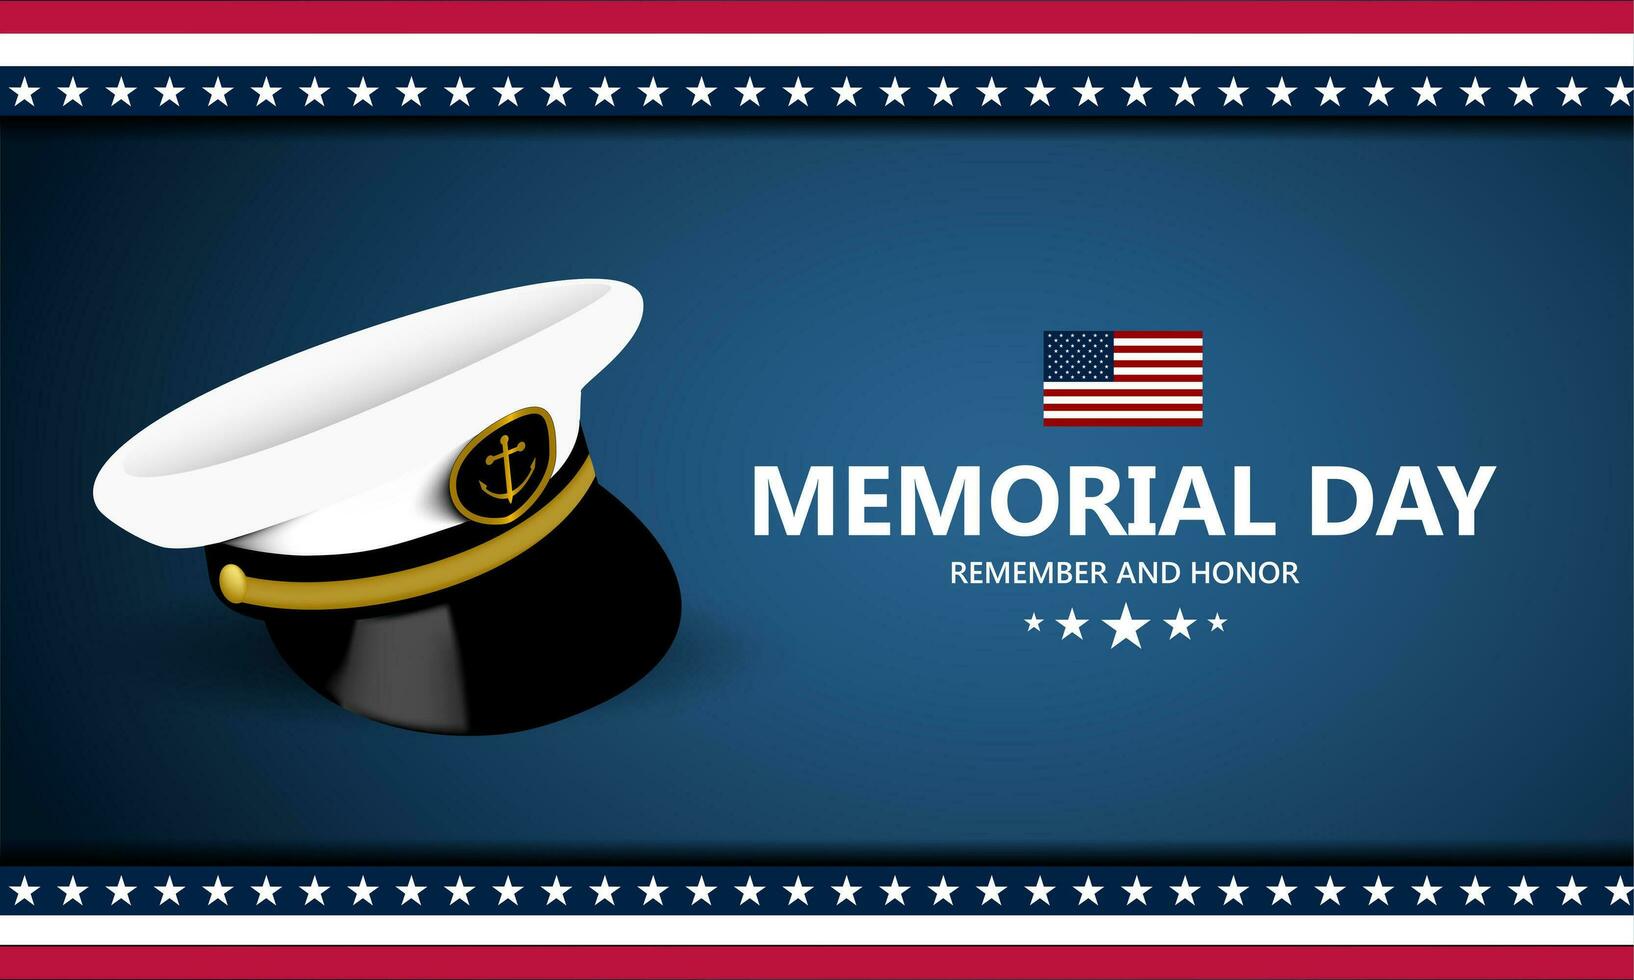 Memorial day background design with remember and honor text vector